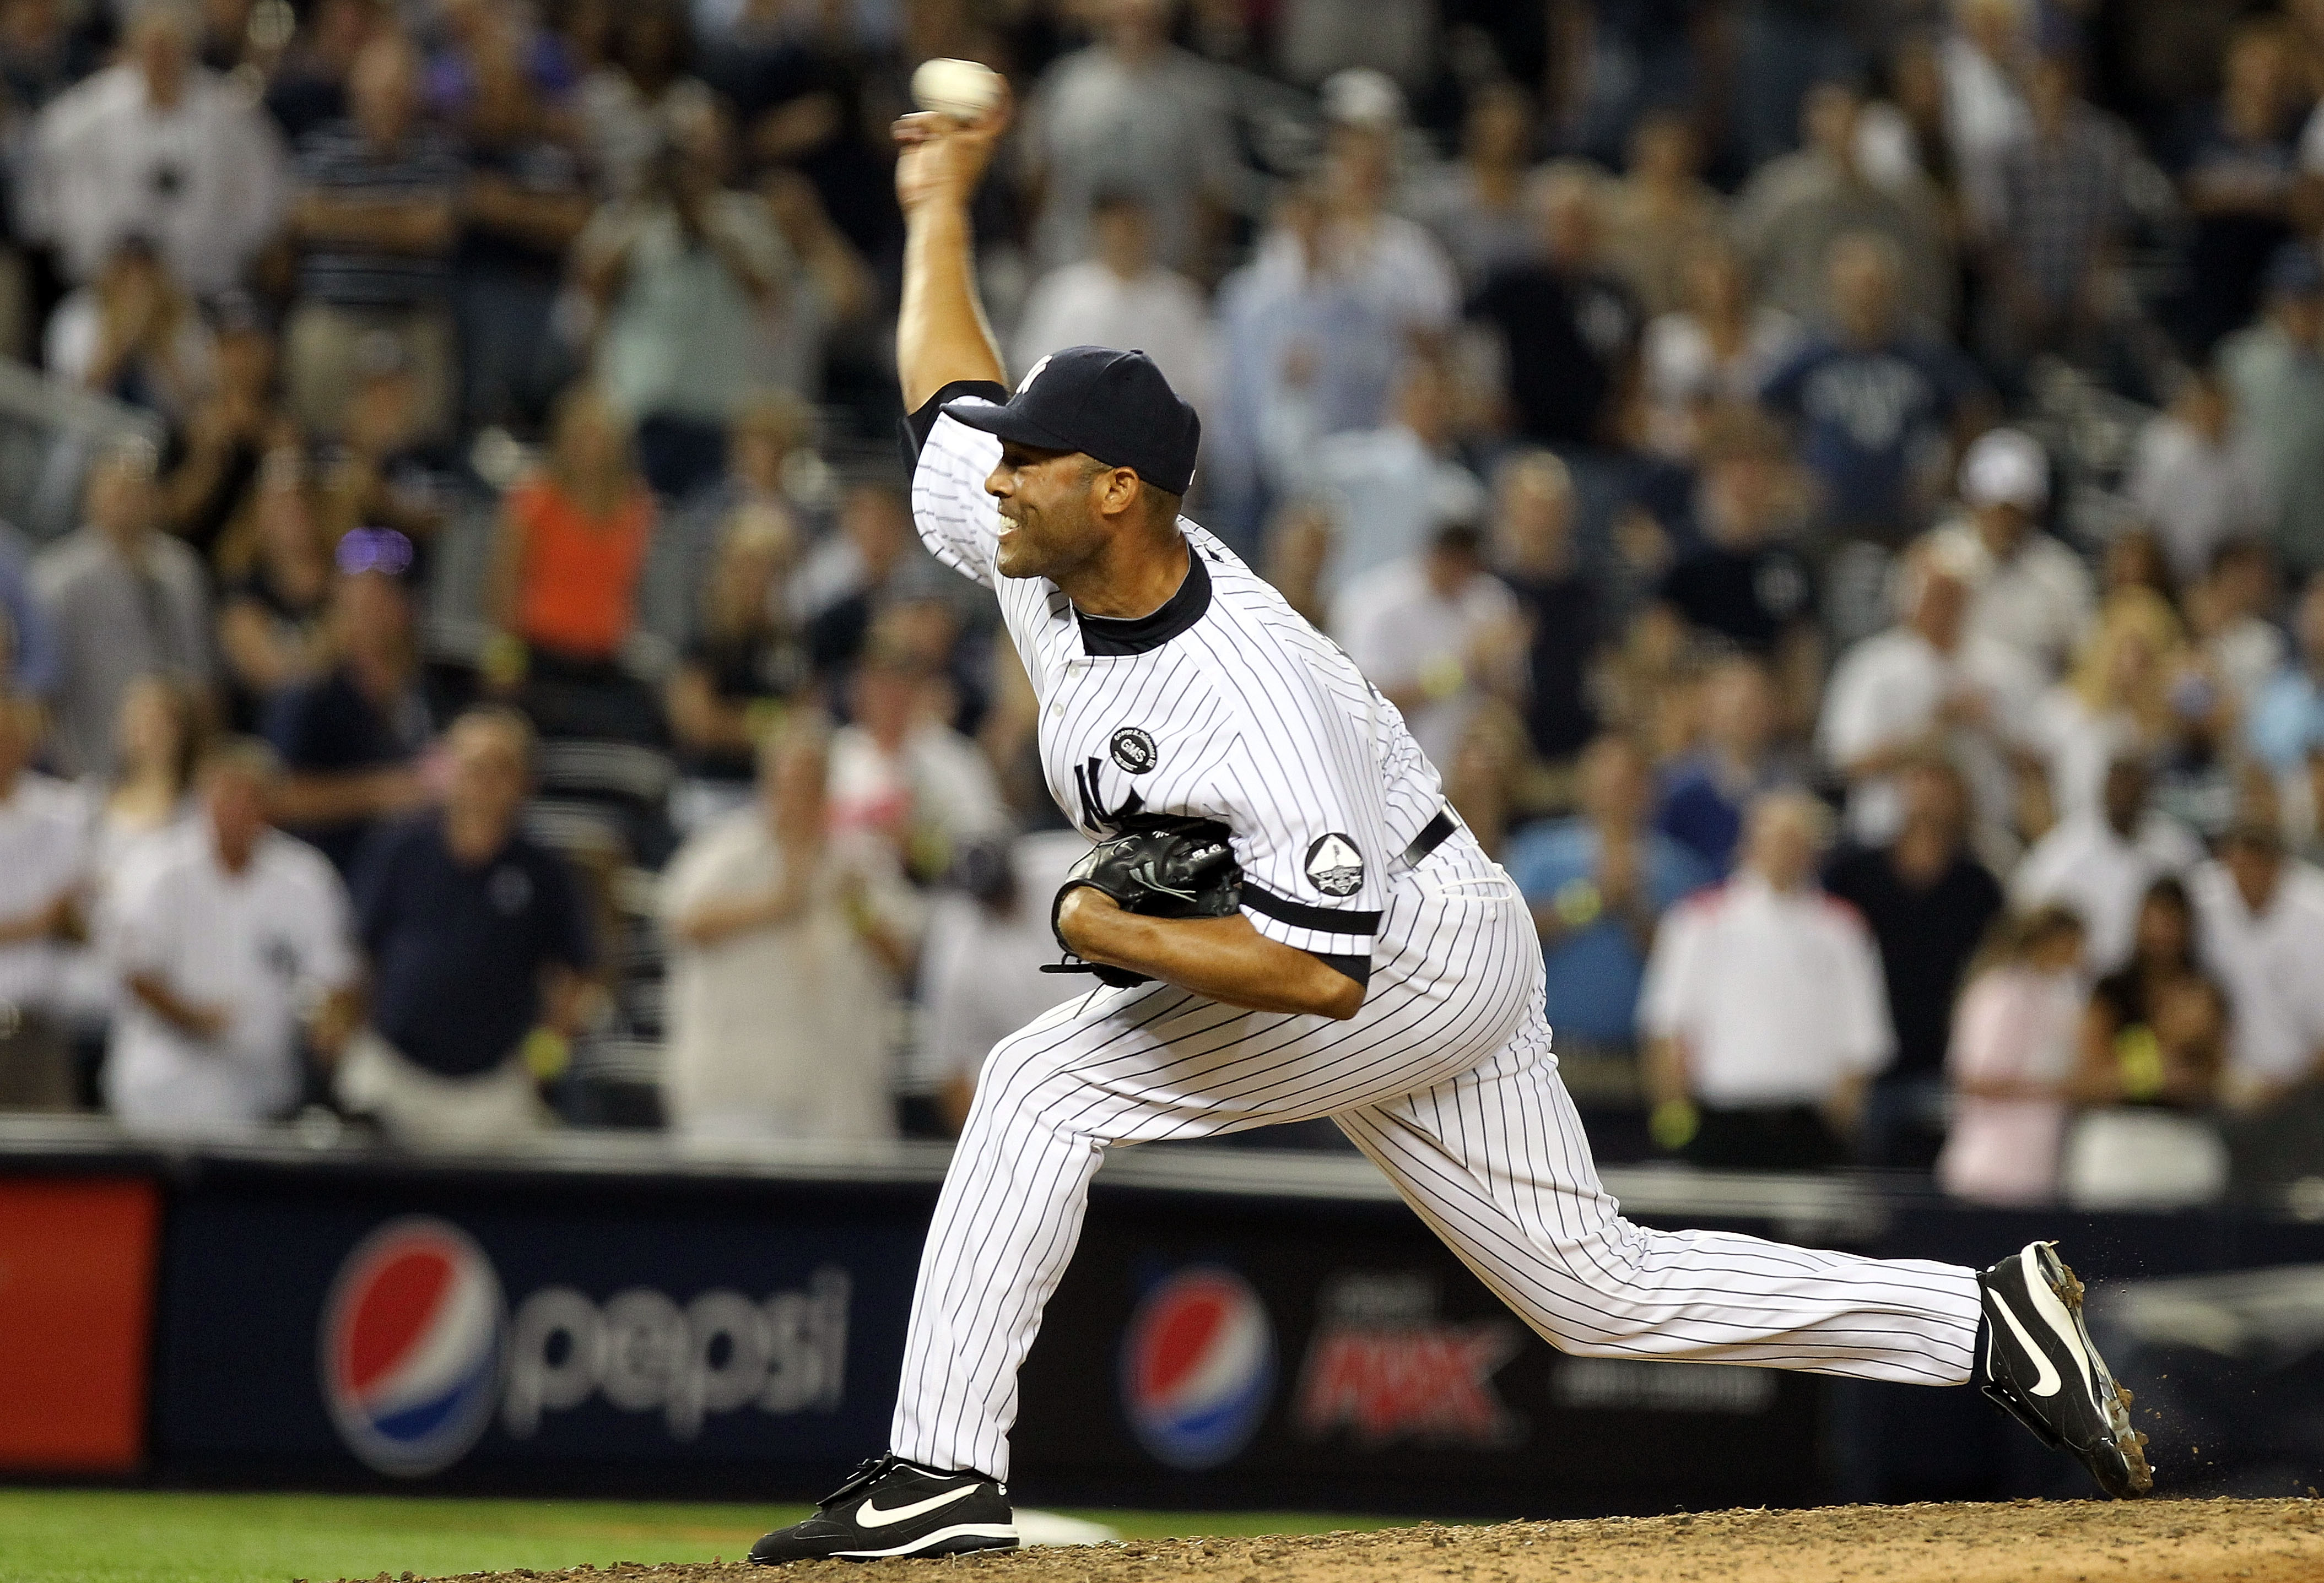 Mariano Rivera pitching on August 18, 2010. Rivera pitched a scoreless inning of relief but entered the game in a non-save situation.